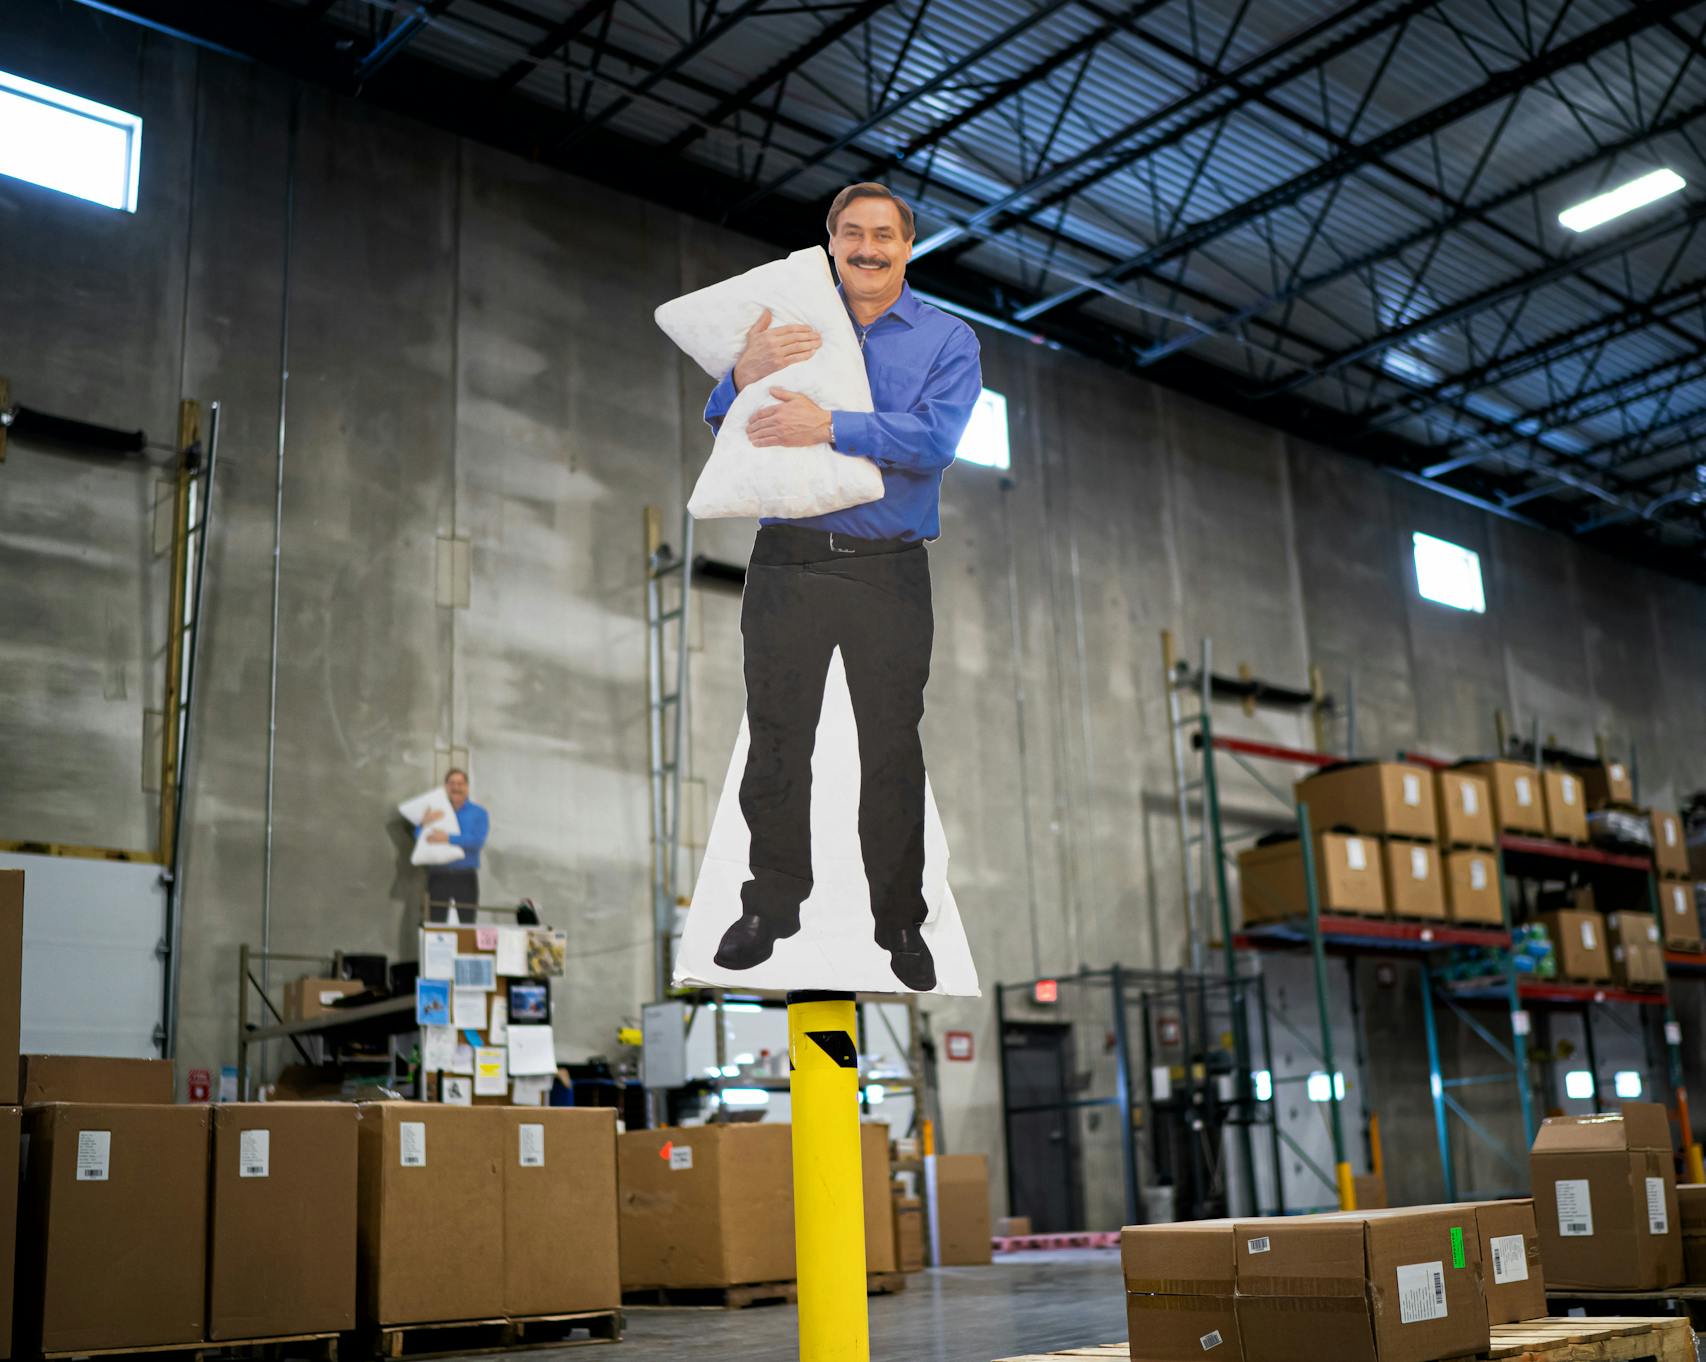 Even when he's not there, Lindell's presence looms large at MyPillow's main factory in Shakopee.